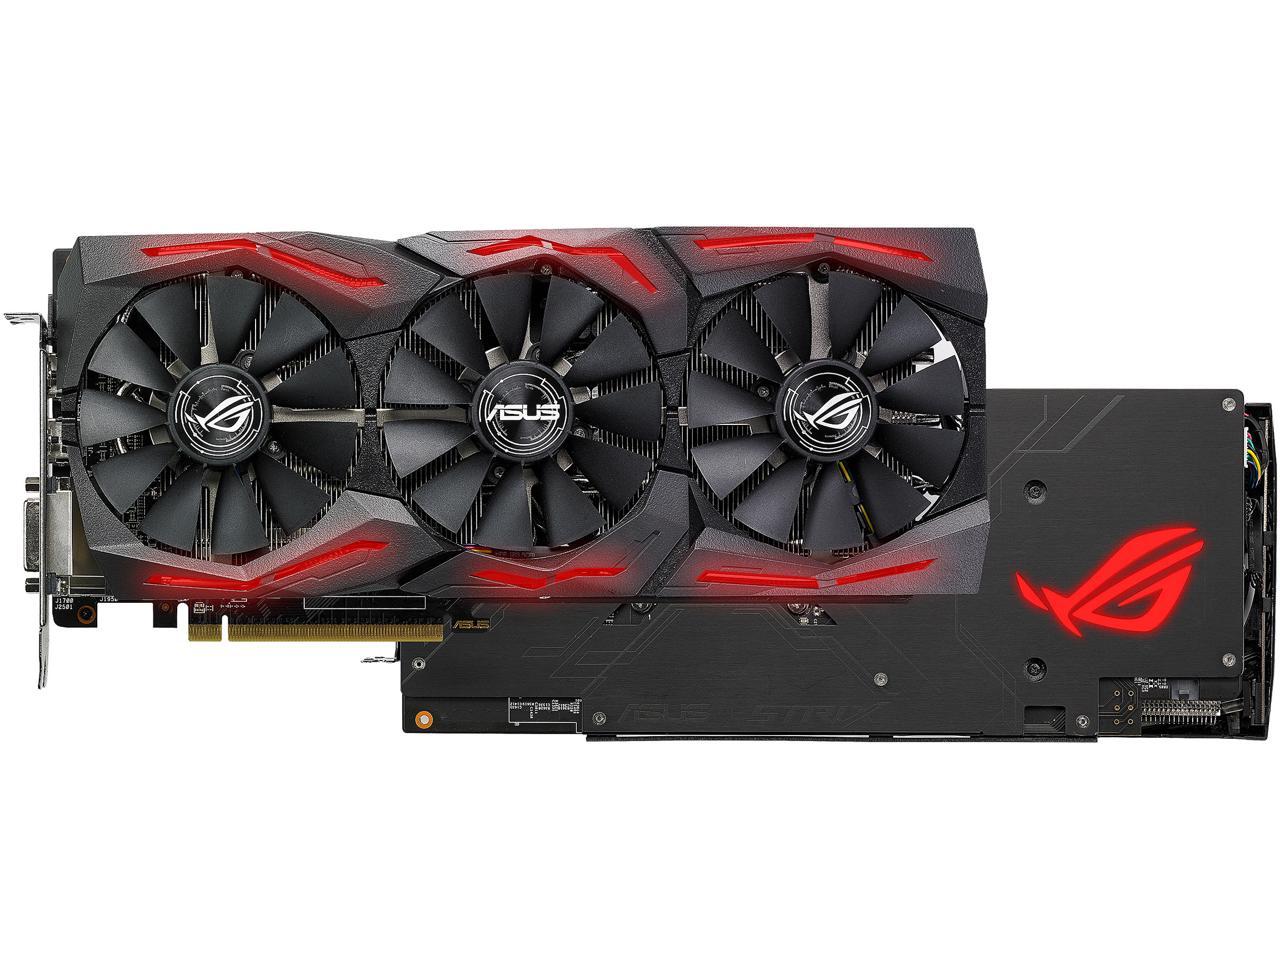 Penetrate Book politician Used - Like New: ASUS ROG Strix Radeon RX 580 O8G Gaming OC Edition GDDR5  DP HDMI DVI VR Ready AMD Graphics Card with RGB Lighting (ROG-STRIX-RX580-O8G-GAMING)  - Newegg.com